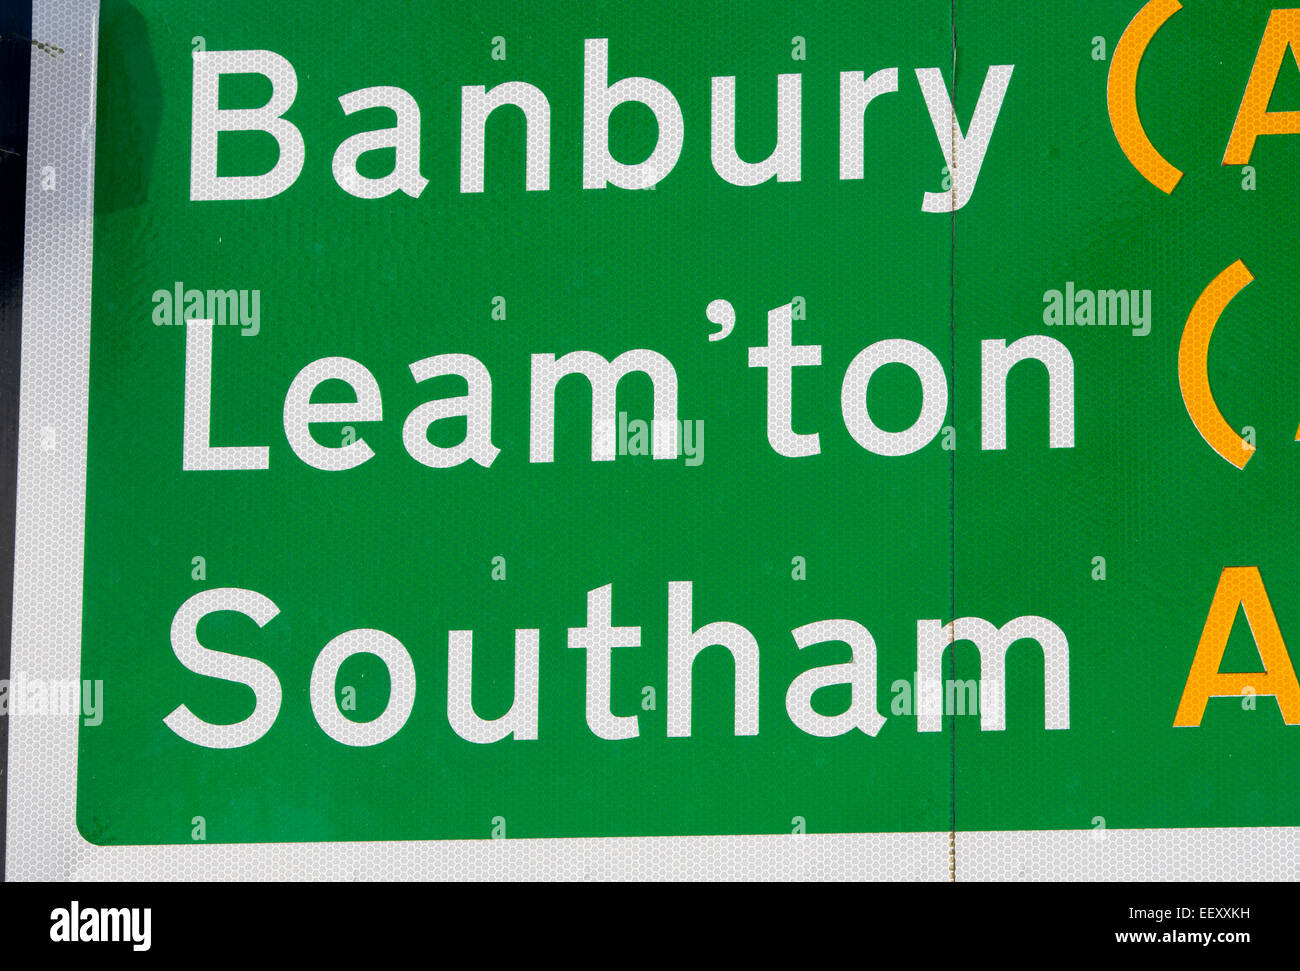 An apostrophe used as an abbreviation on a road sign Stock Photo